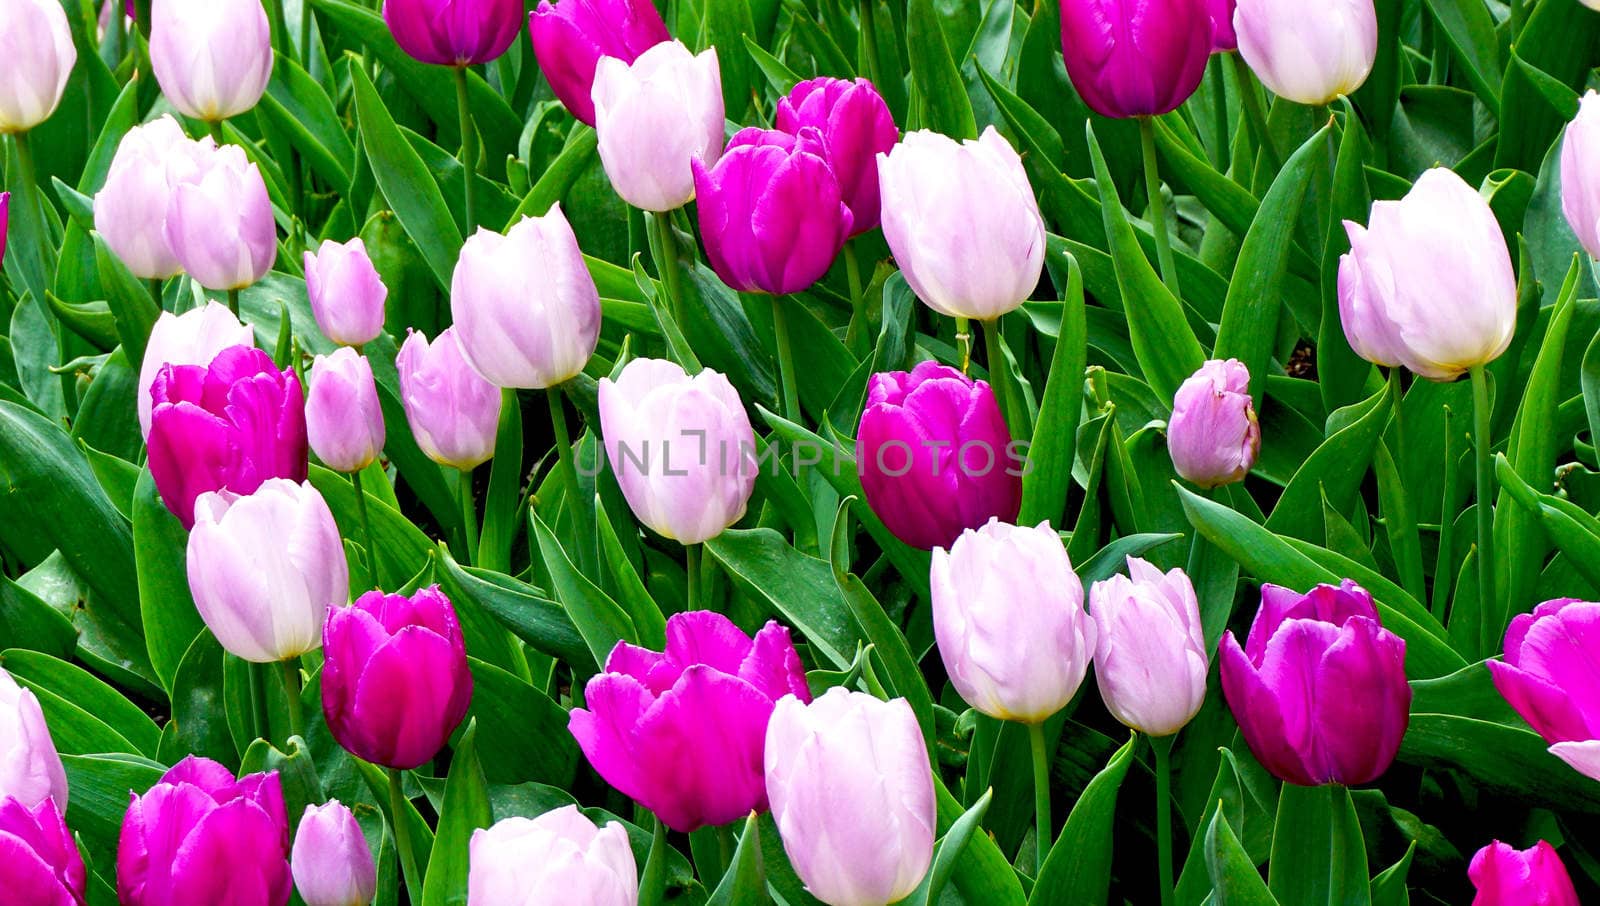 Pink and purple tulip flowers in the garden by polarbearstudio